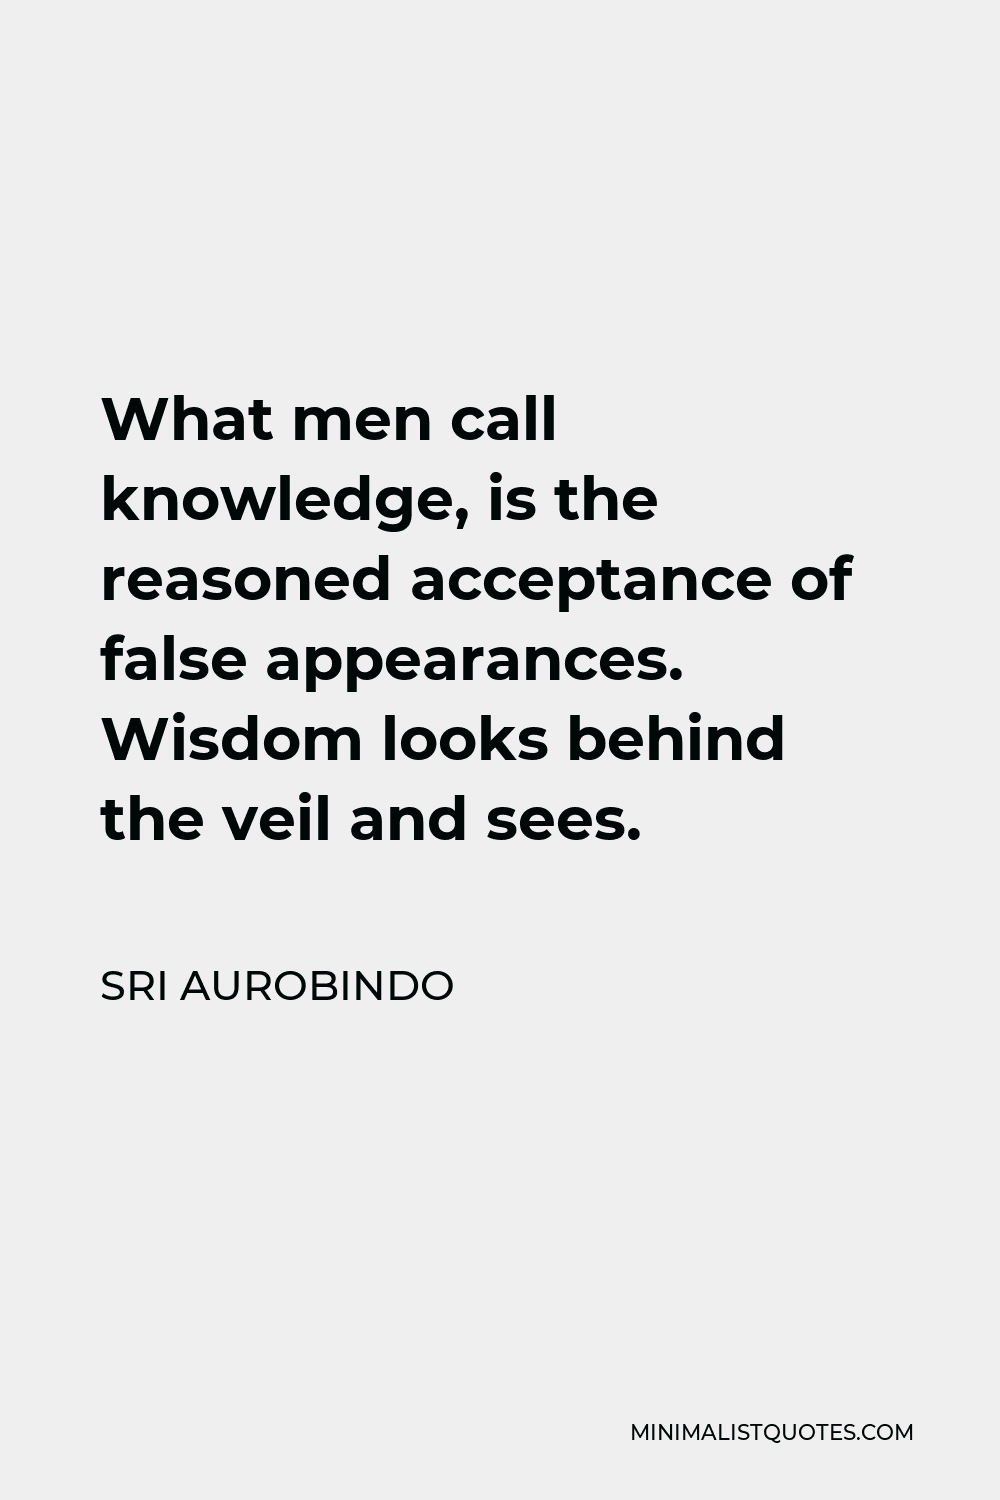 Sri Aurobindo Quote - What men call knowledge, is the reasoned acceptance of false appearances. Wisdom looks behind the veil and sees.